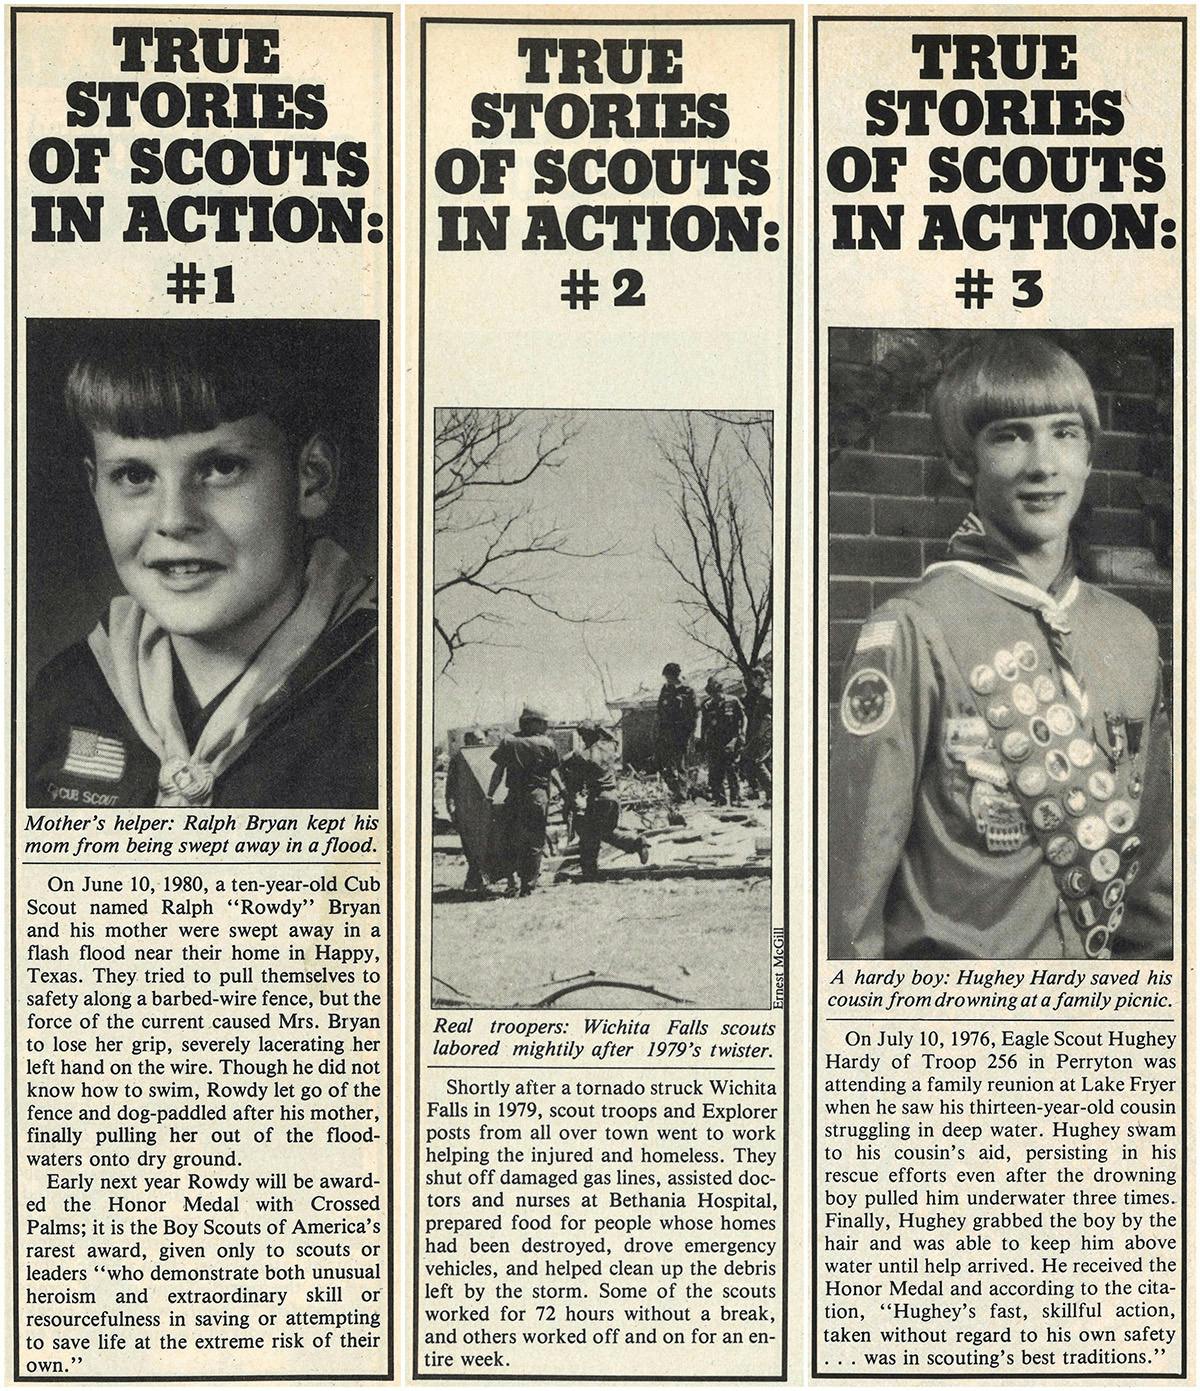 Newspaper clippings of "scouts in action" stories. 